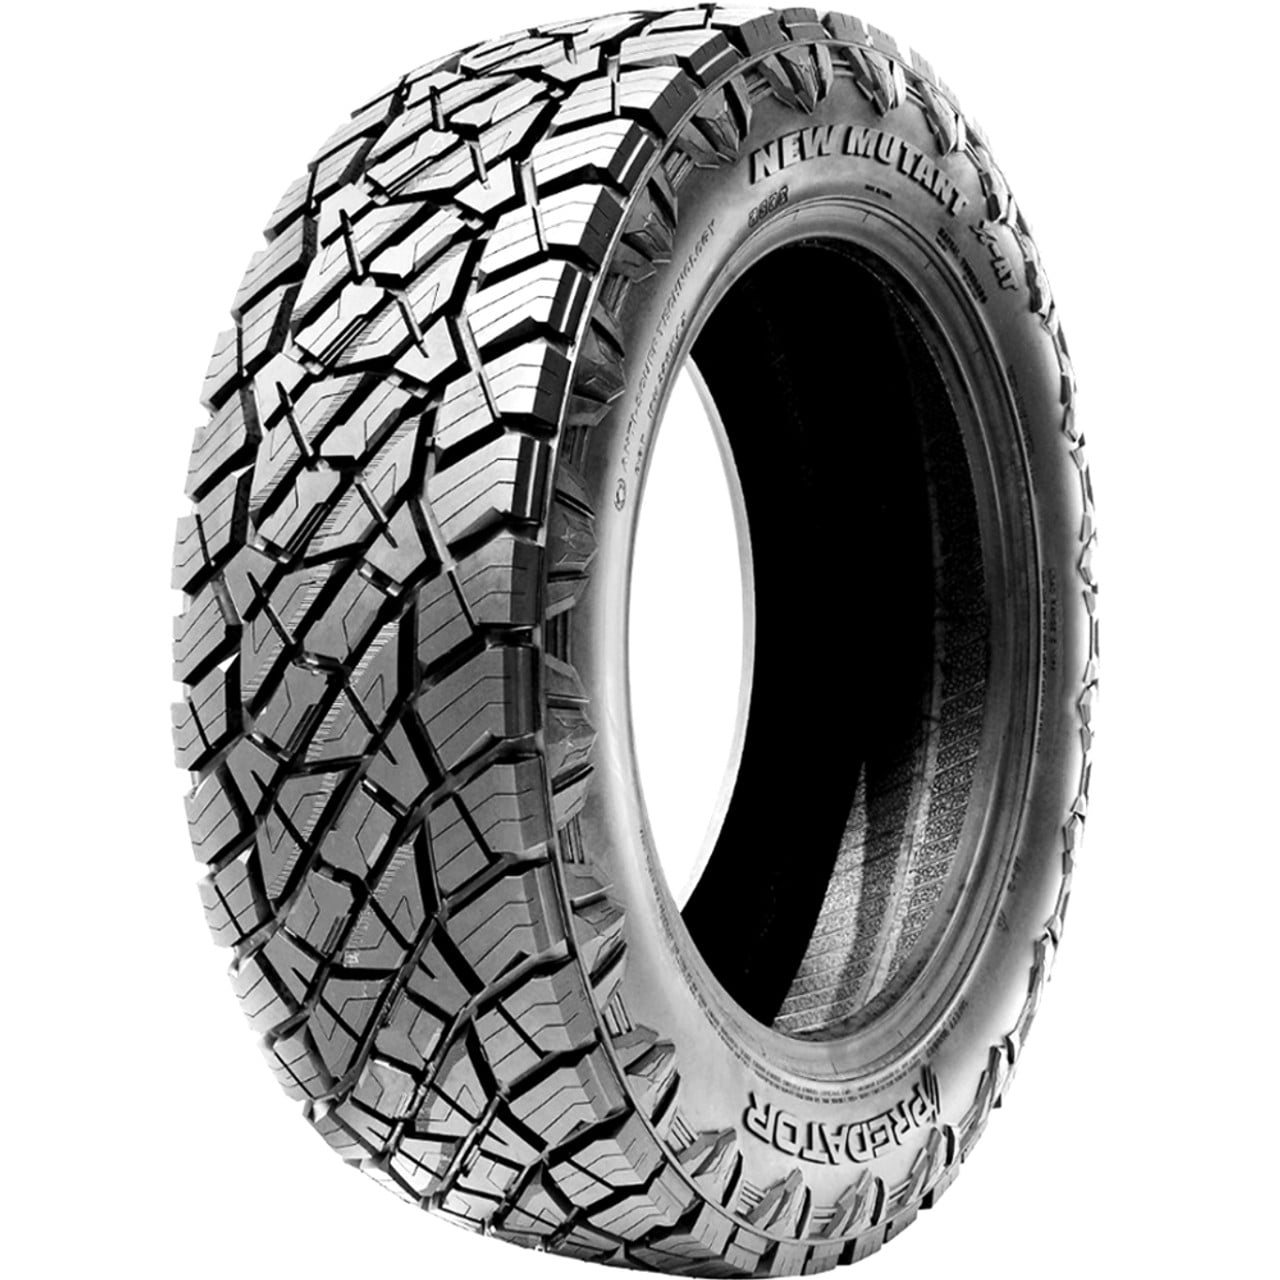 2 New Predator Mutant X-AT All-Terrain Tires  LRE 10PLY -  